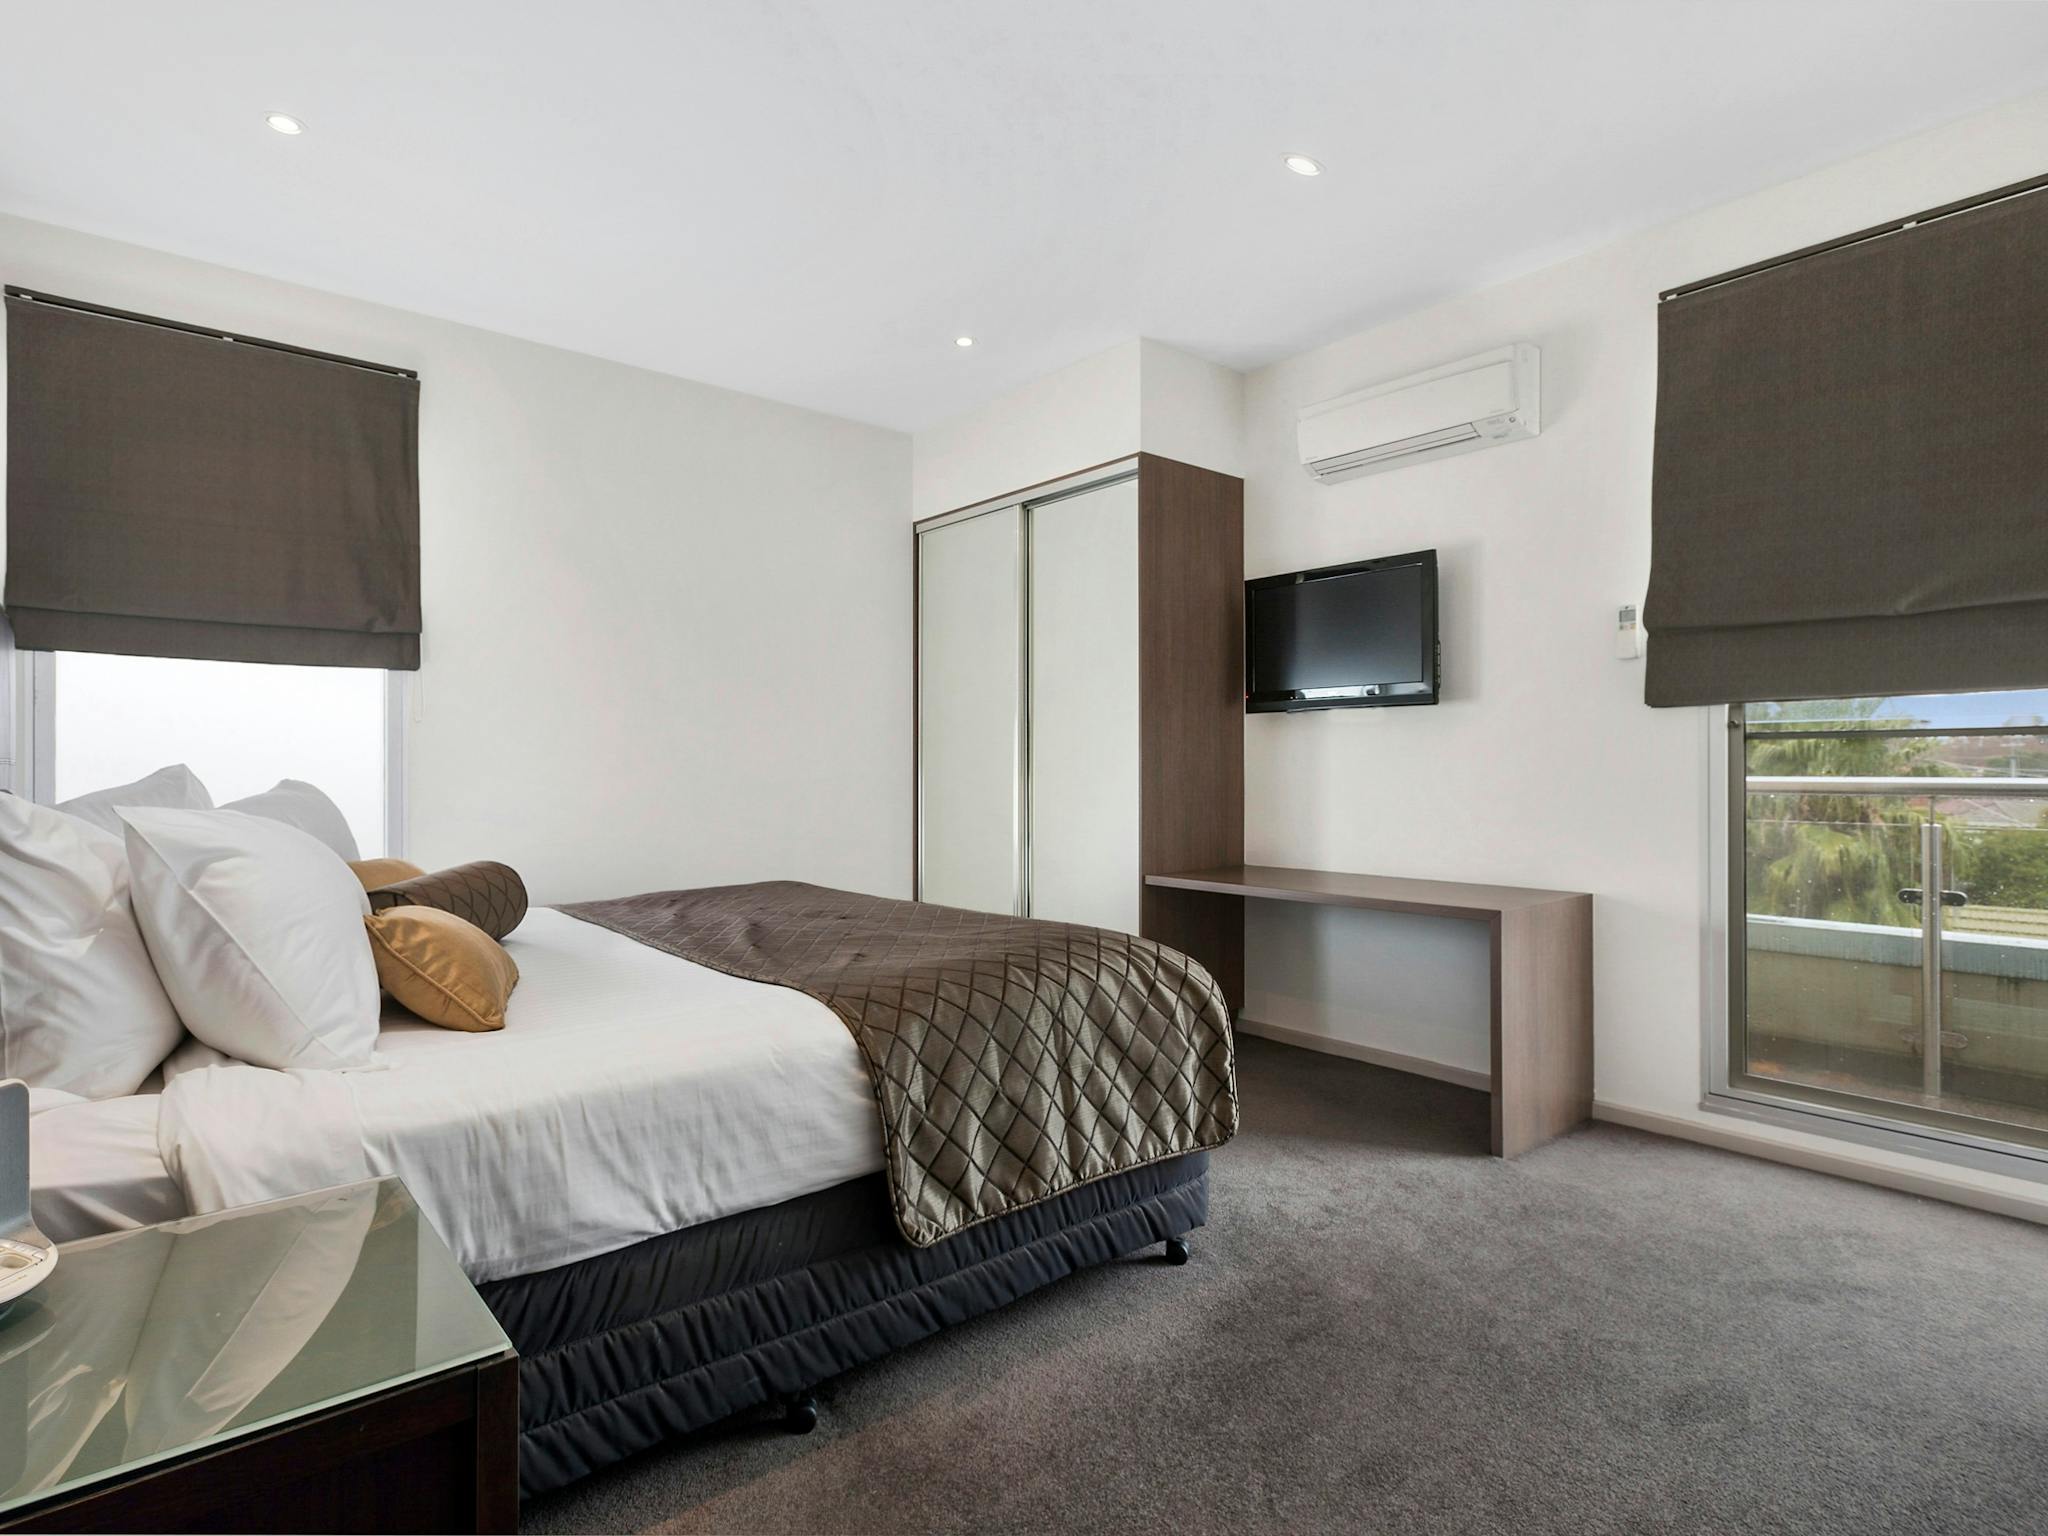 The Gateway's Two Bedroom Apartment offers a master bedroom with queen bed, robe & television